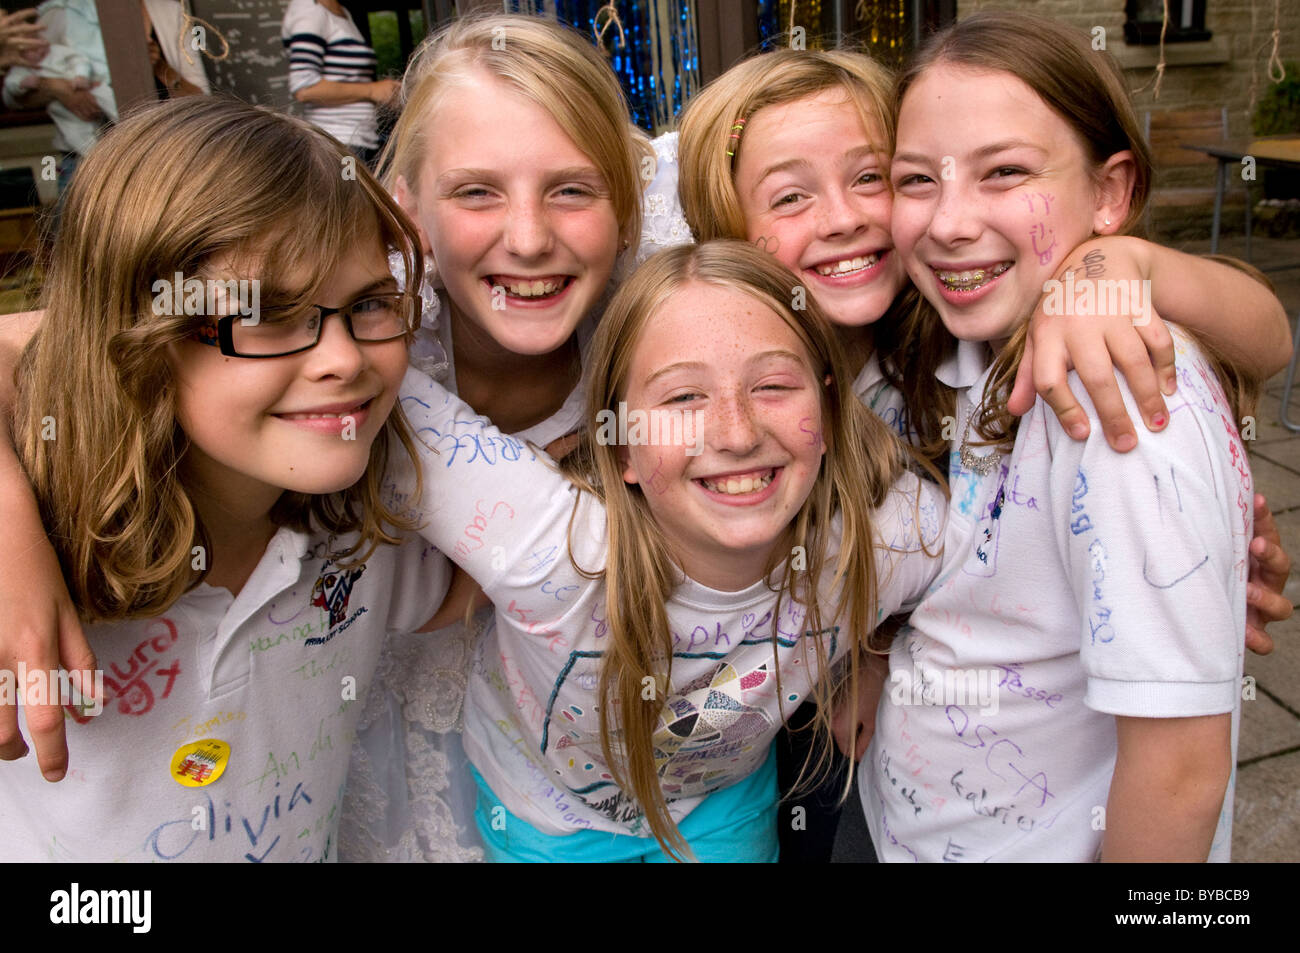 Portrait of a group of school girls at a school leavers party Stock Photo